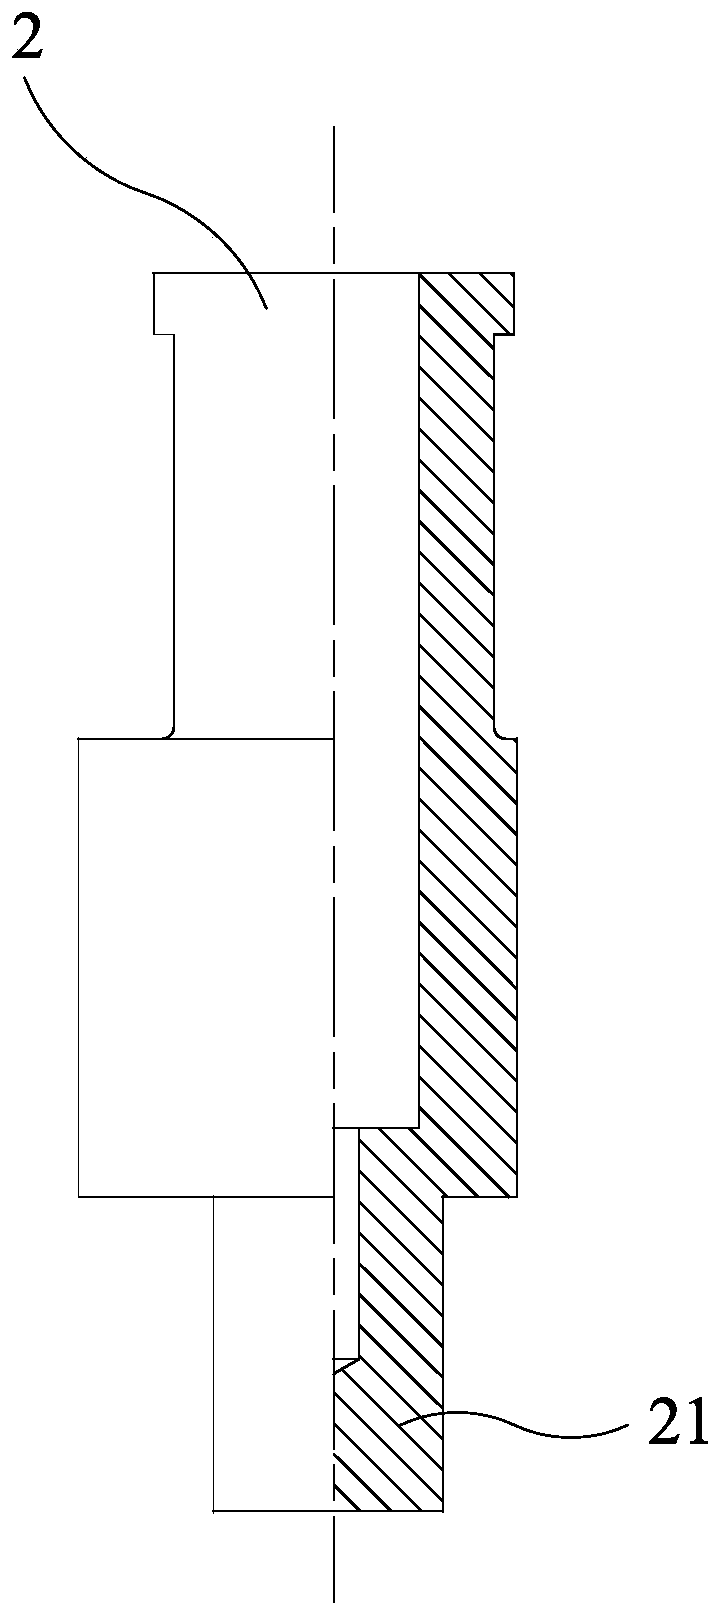 Extrusion forming method for no-anisotropy magnesium alloy rods